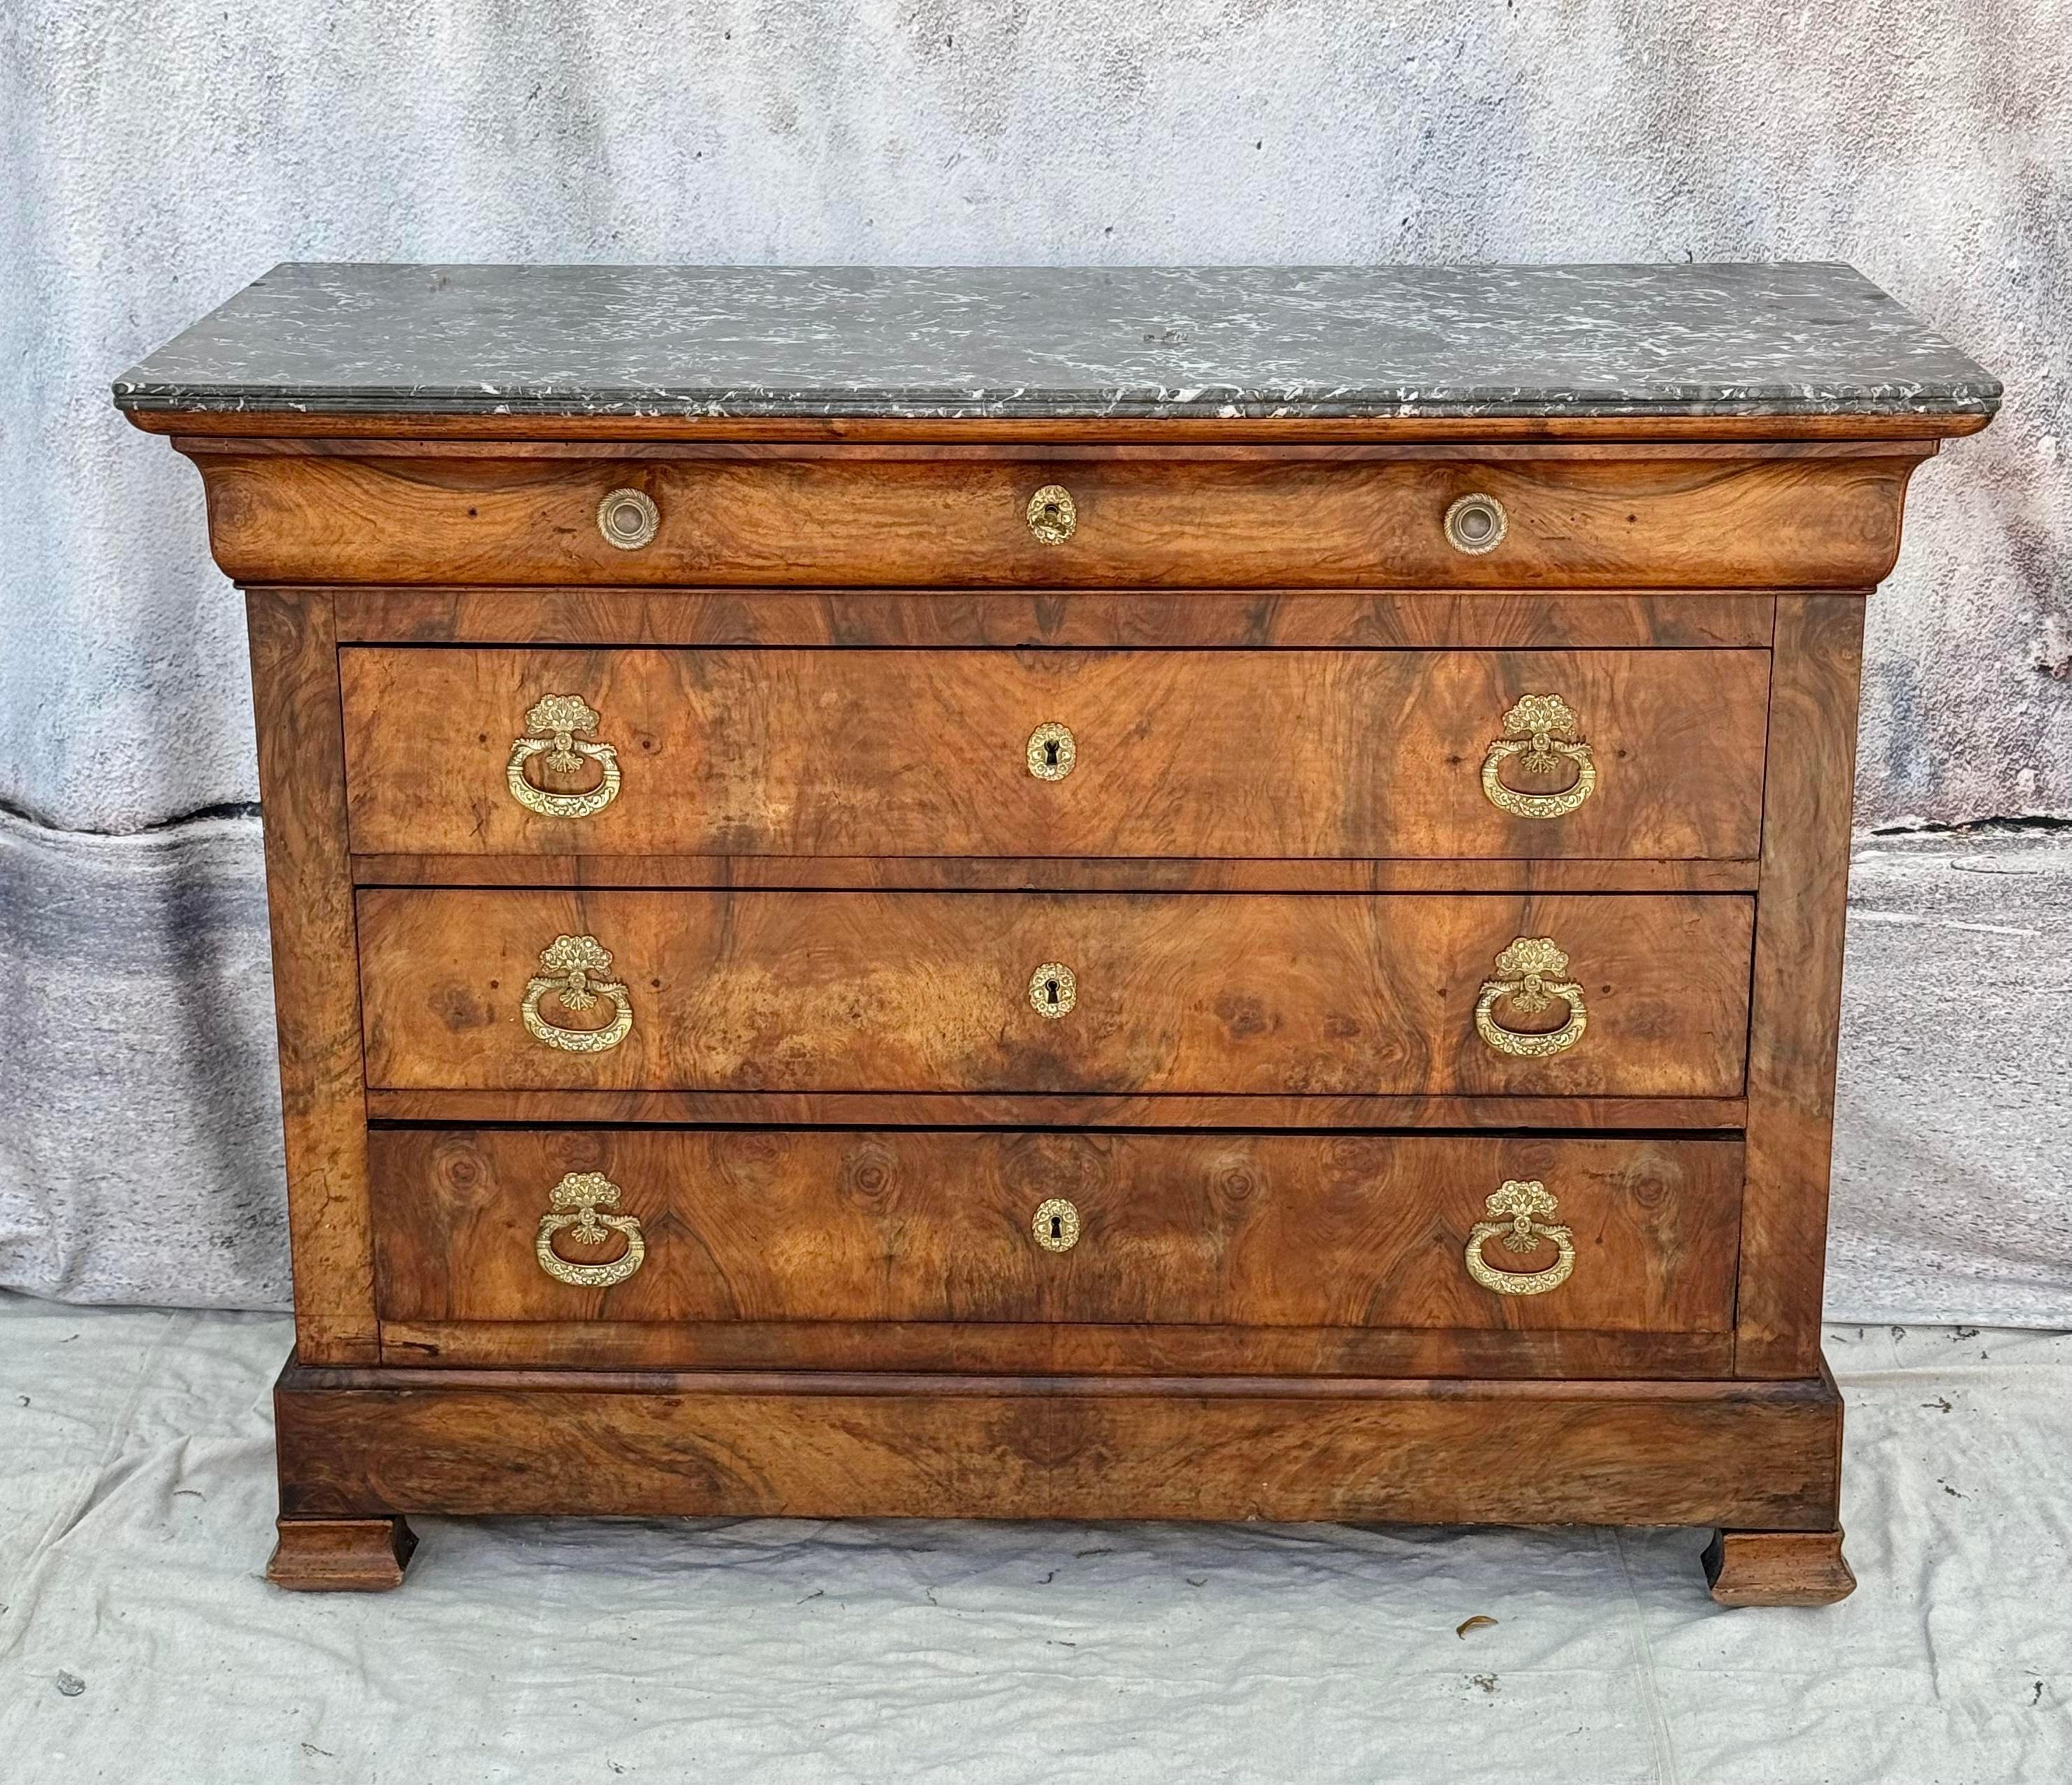 French Empire Marble Top Walnut Commode In Good Condition For Sale In Bradenton, FL